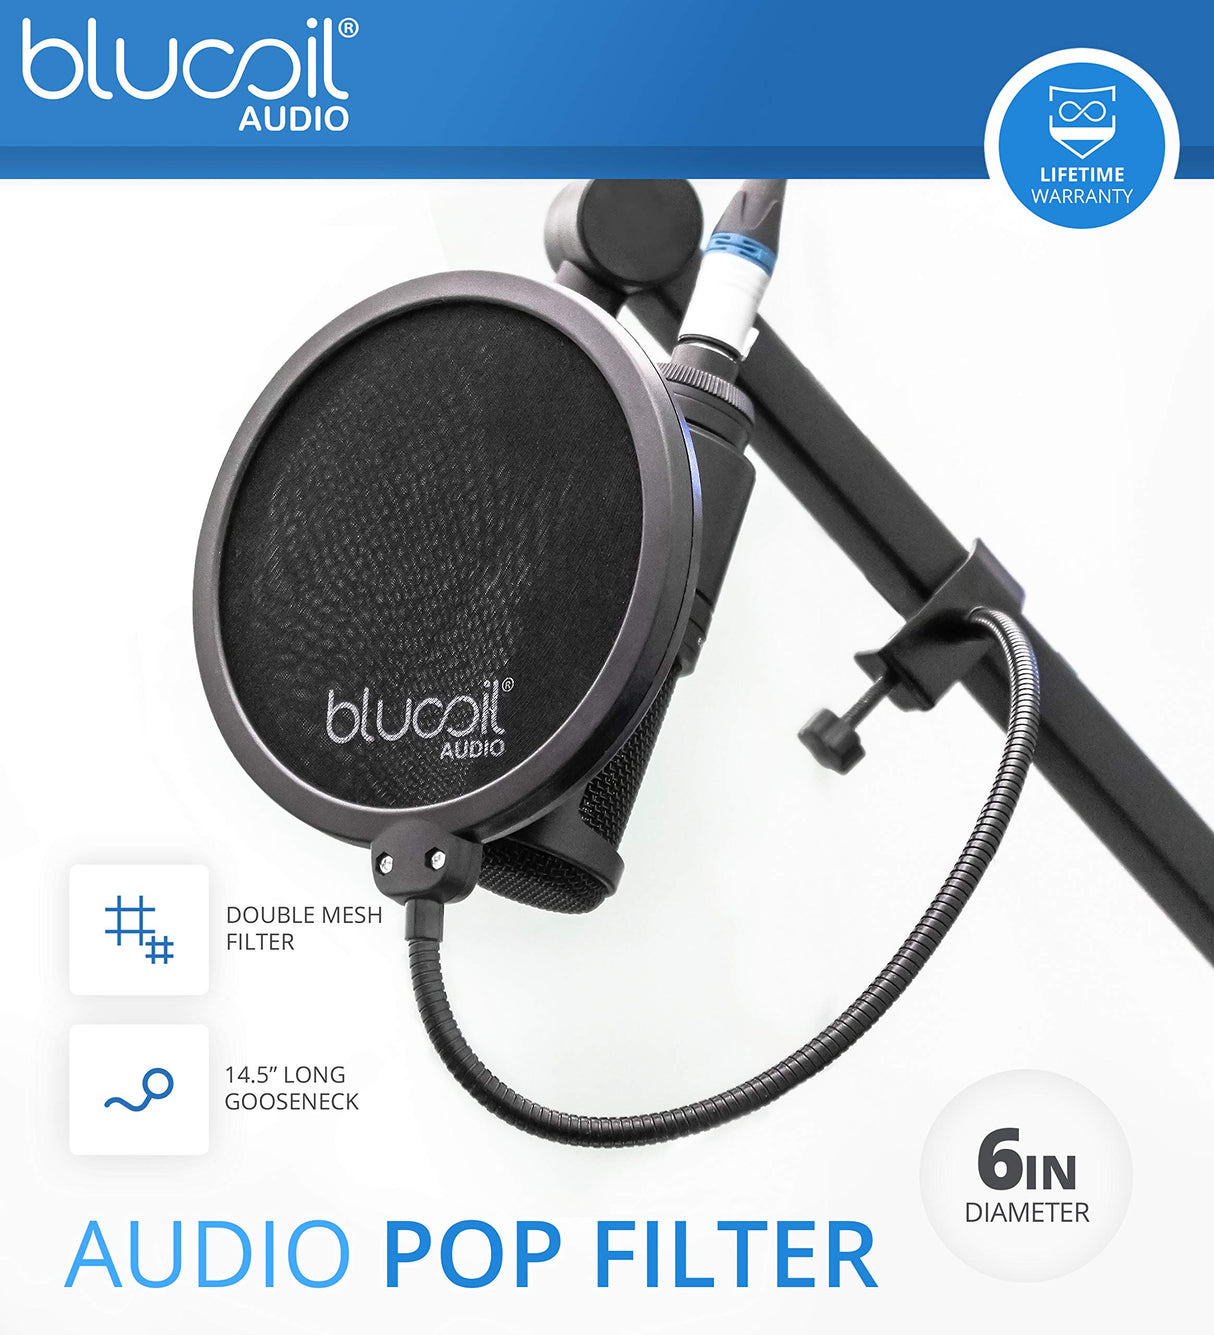 blucoil MXL 770 Cardioid Condenser Microphone for Piano, Guitar, and Vocal Recording (Black) Bundle Portable USB Audio Interface for Windows and Mac, 10' XLR Cable, and Pop Filter Windscreen